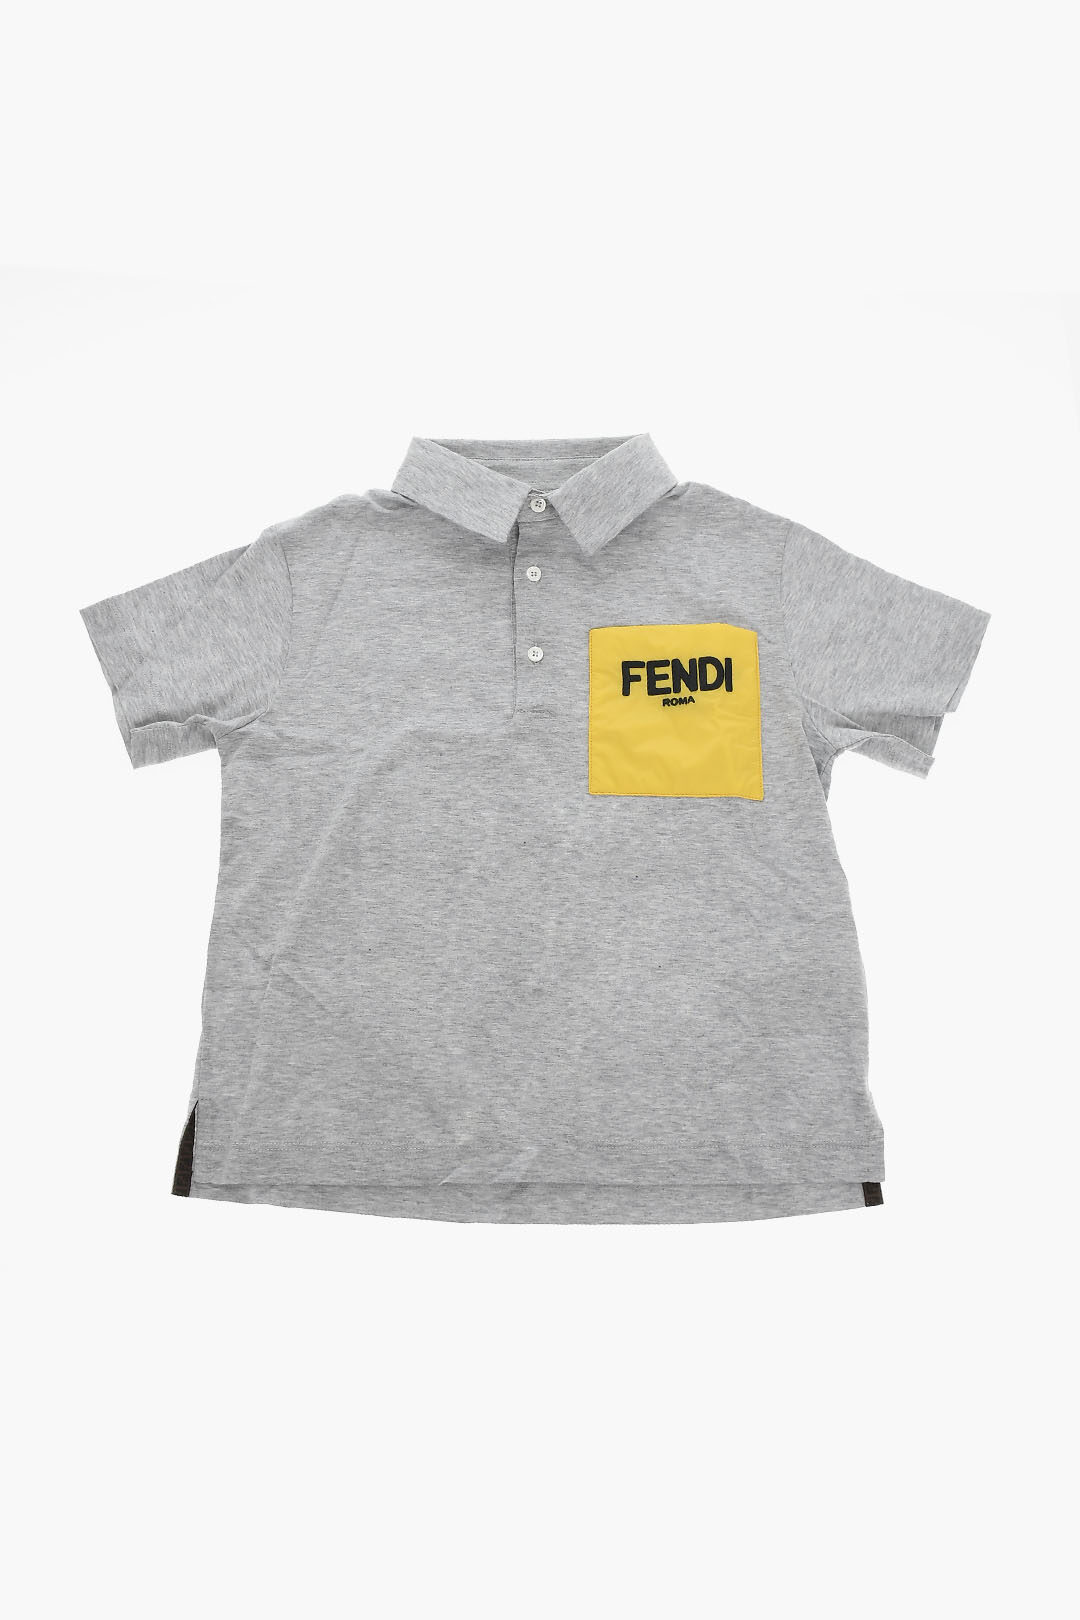 Fendi Kids Polo Shirt with Padded Logoed Chest Pocket and Side Vents ...